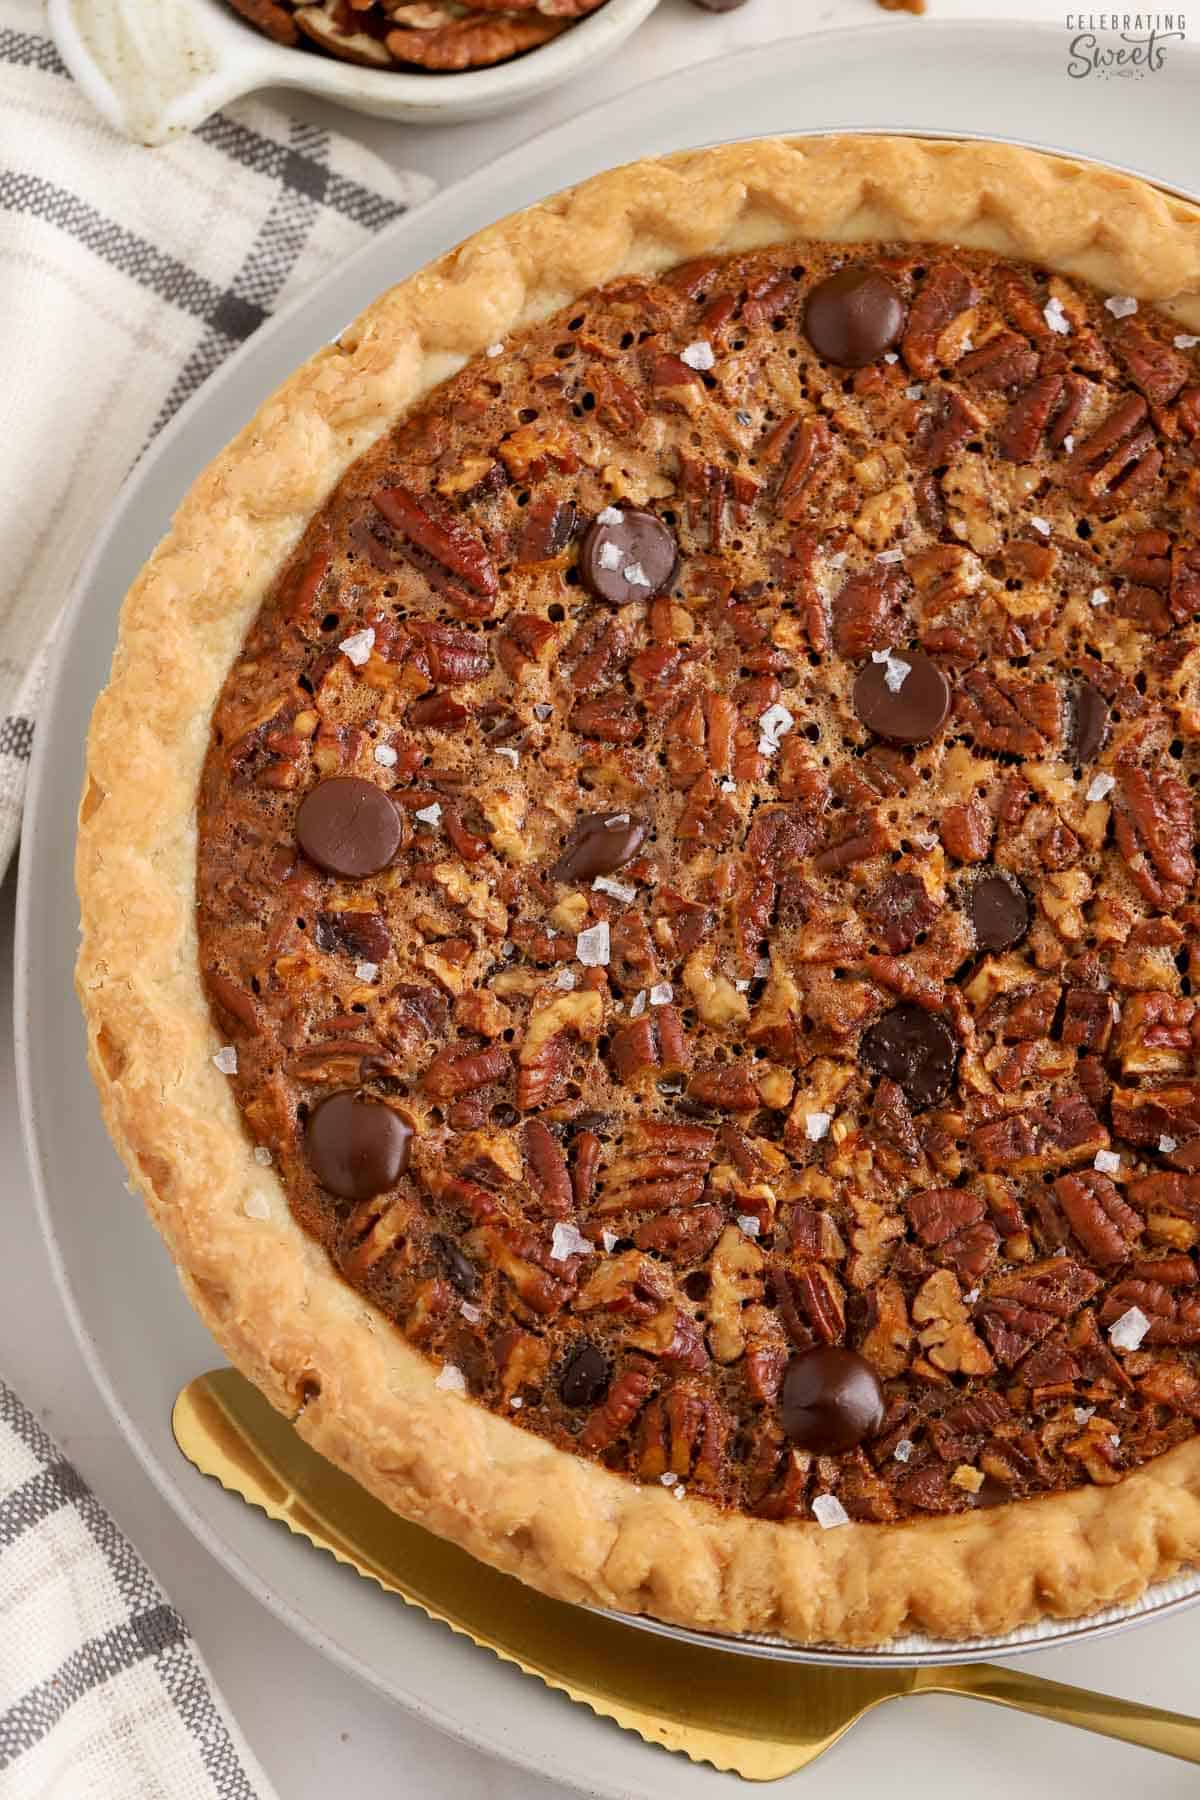 Overhead shot of chocolate pecan pie on a grey plate with a gold pie server.